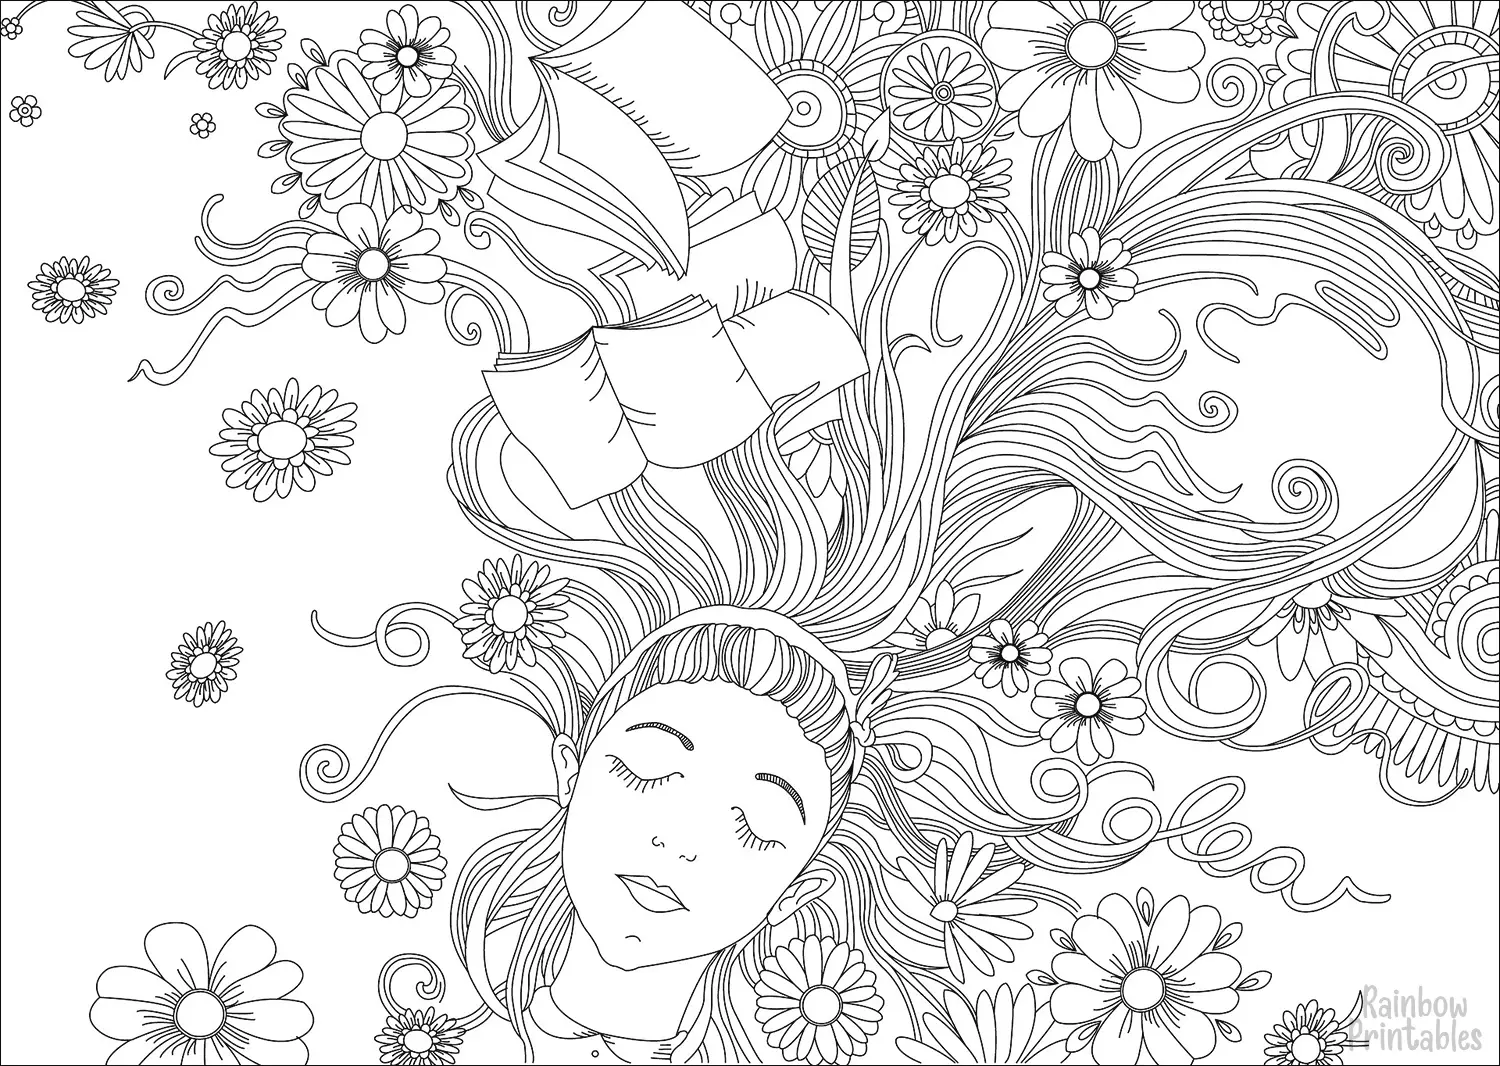 ABSTRACT Alice in Wonderland Book Hair Beautiful Mandala Coloring Pages for Kids Adults Boredom Art Activities Line Art